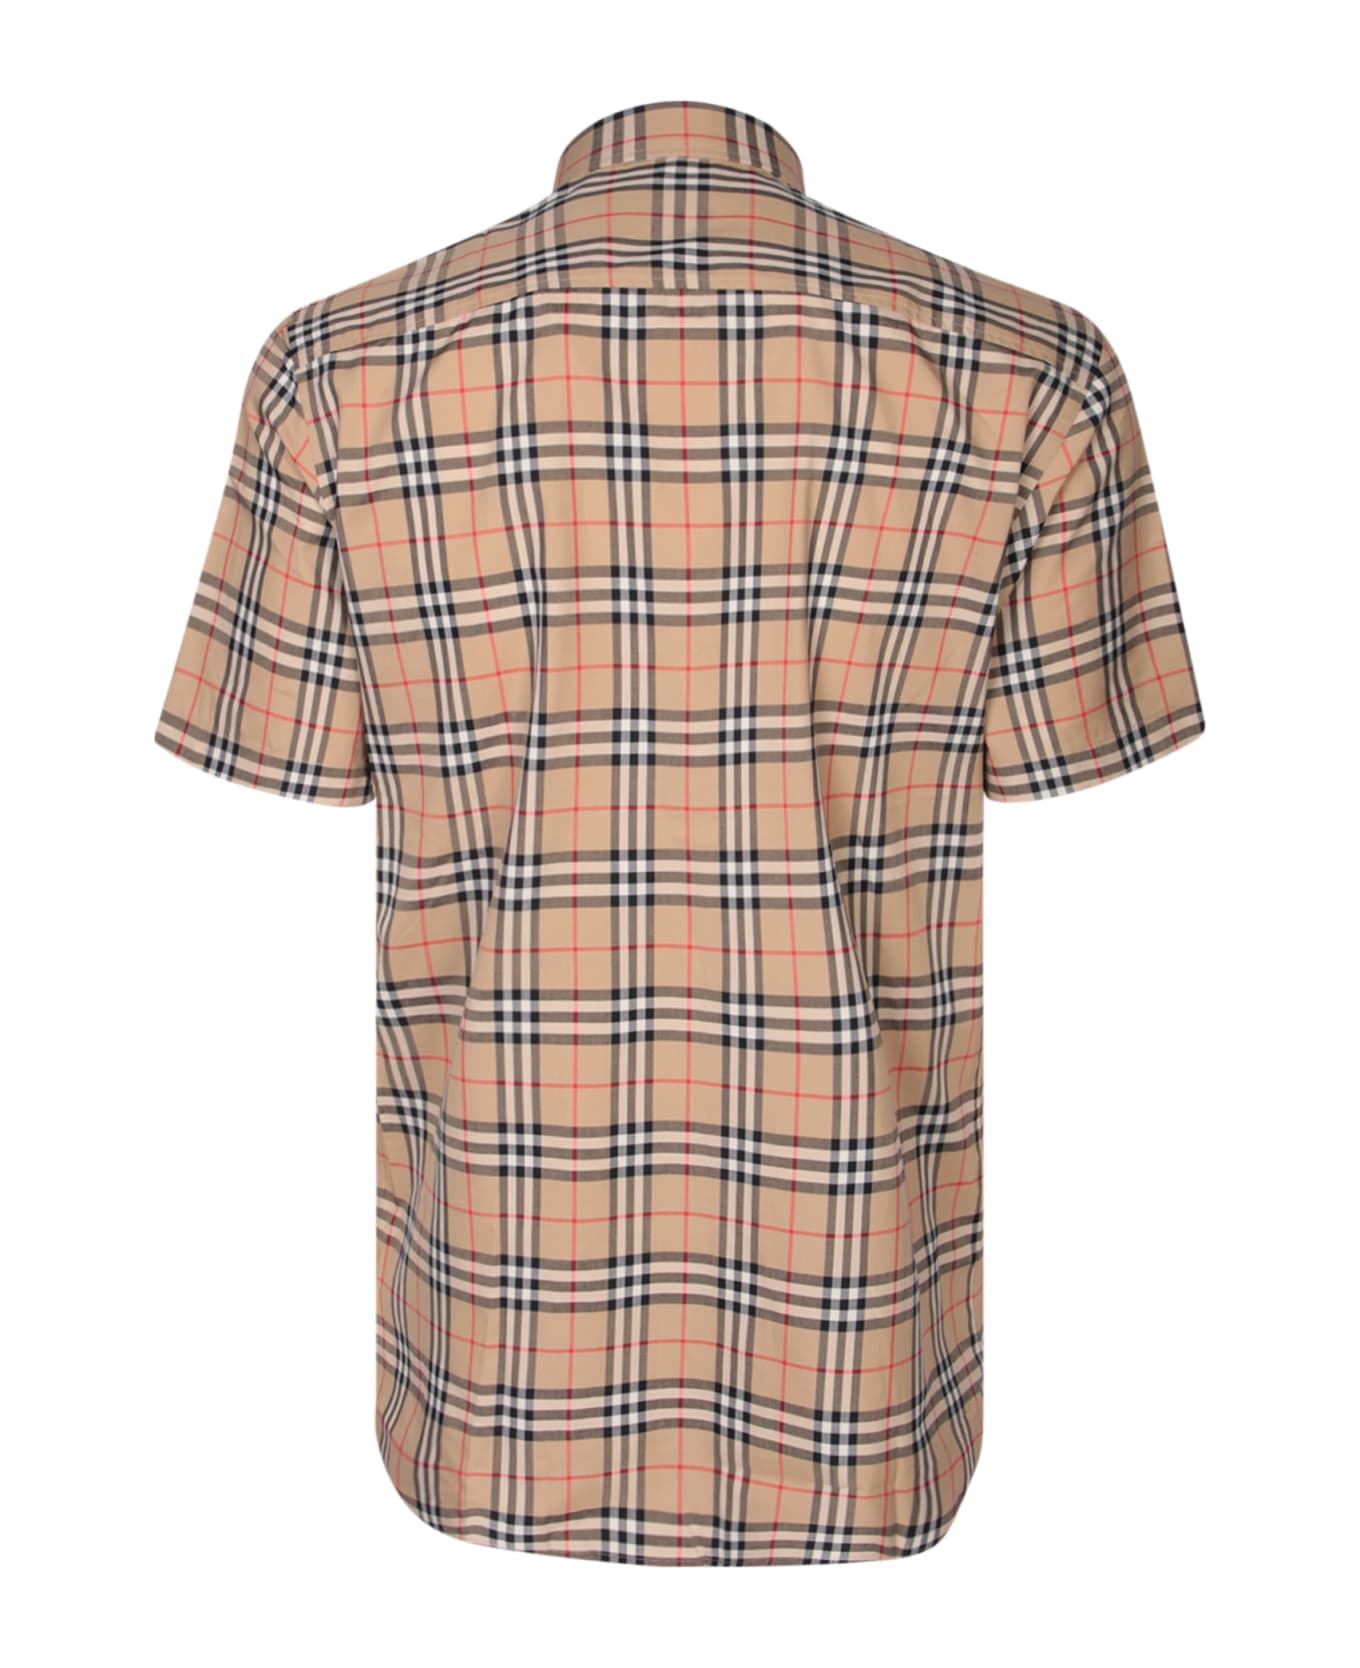 Burberry Vintage Check Shirt In Cotton - Beige シャツ